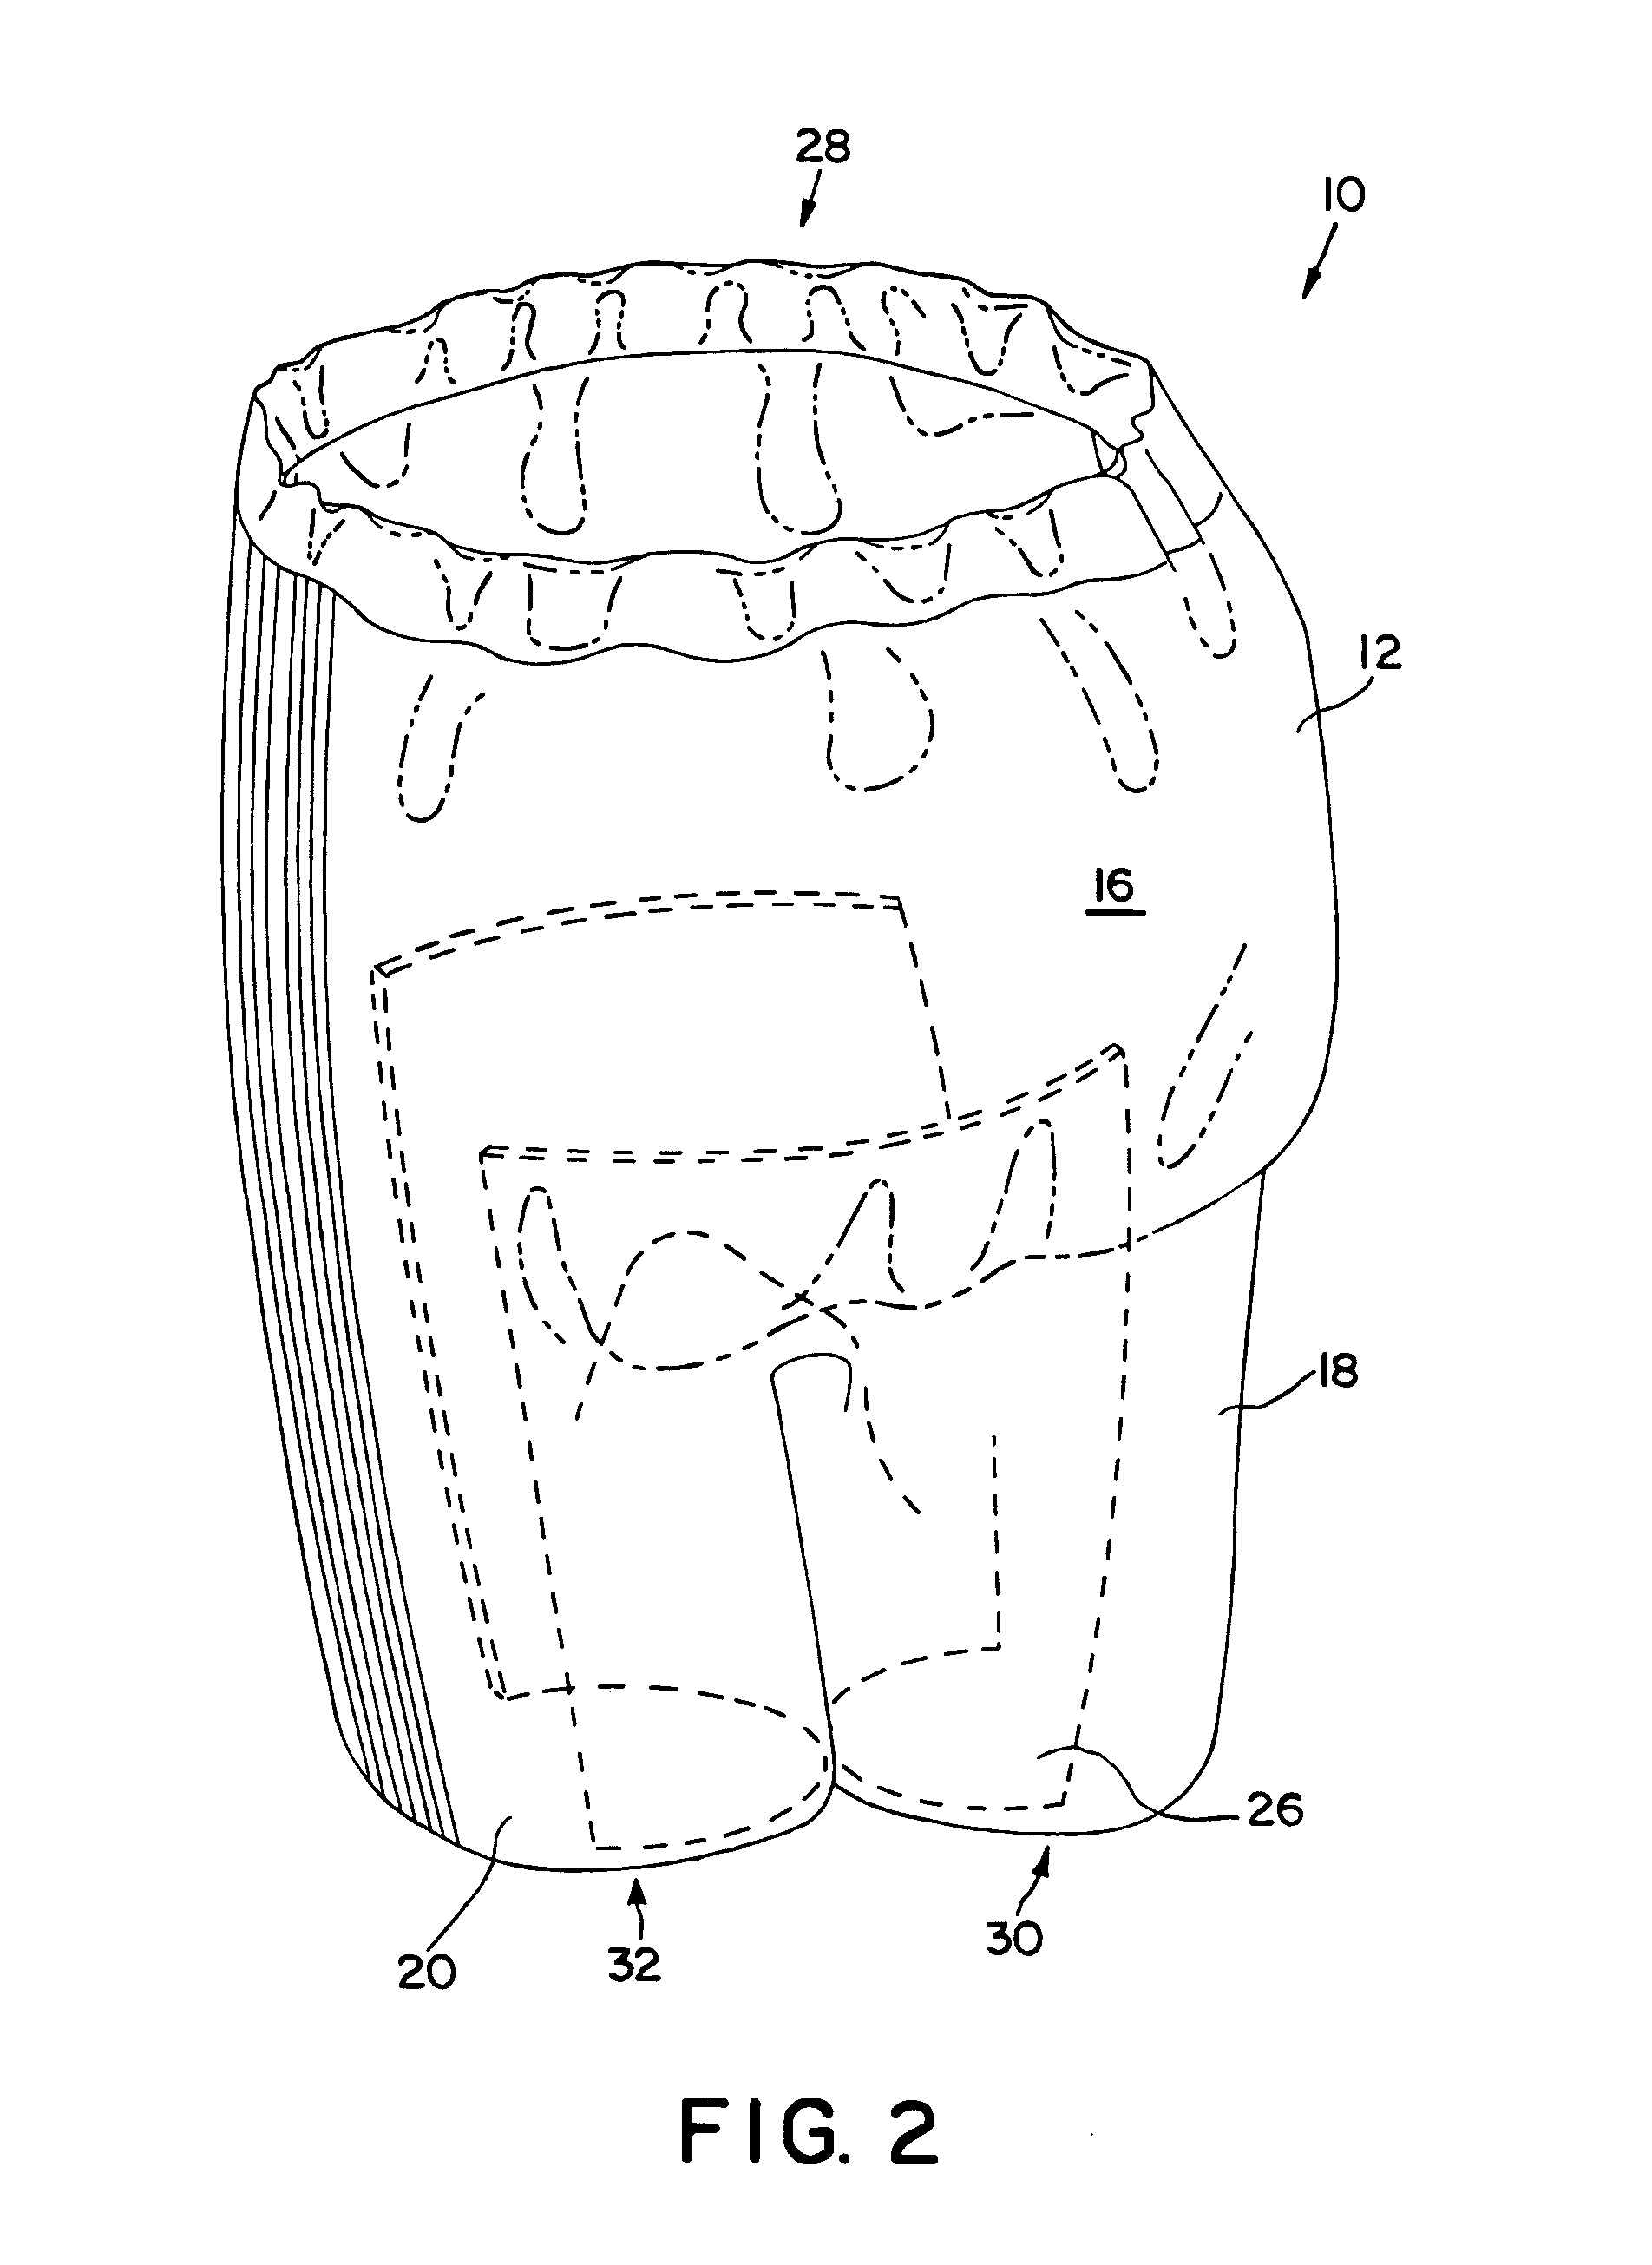 Absorbent articles containing absorbent leg regions